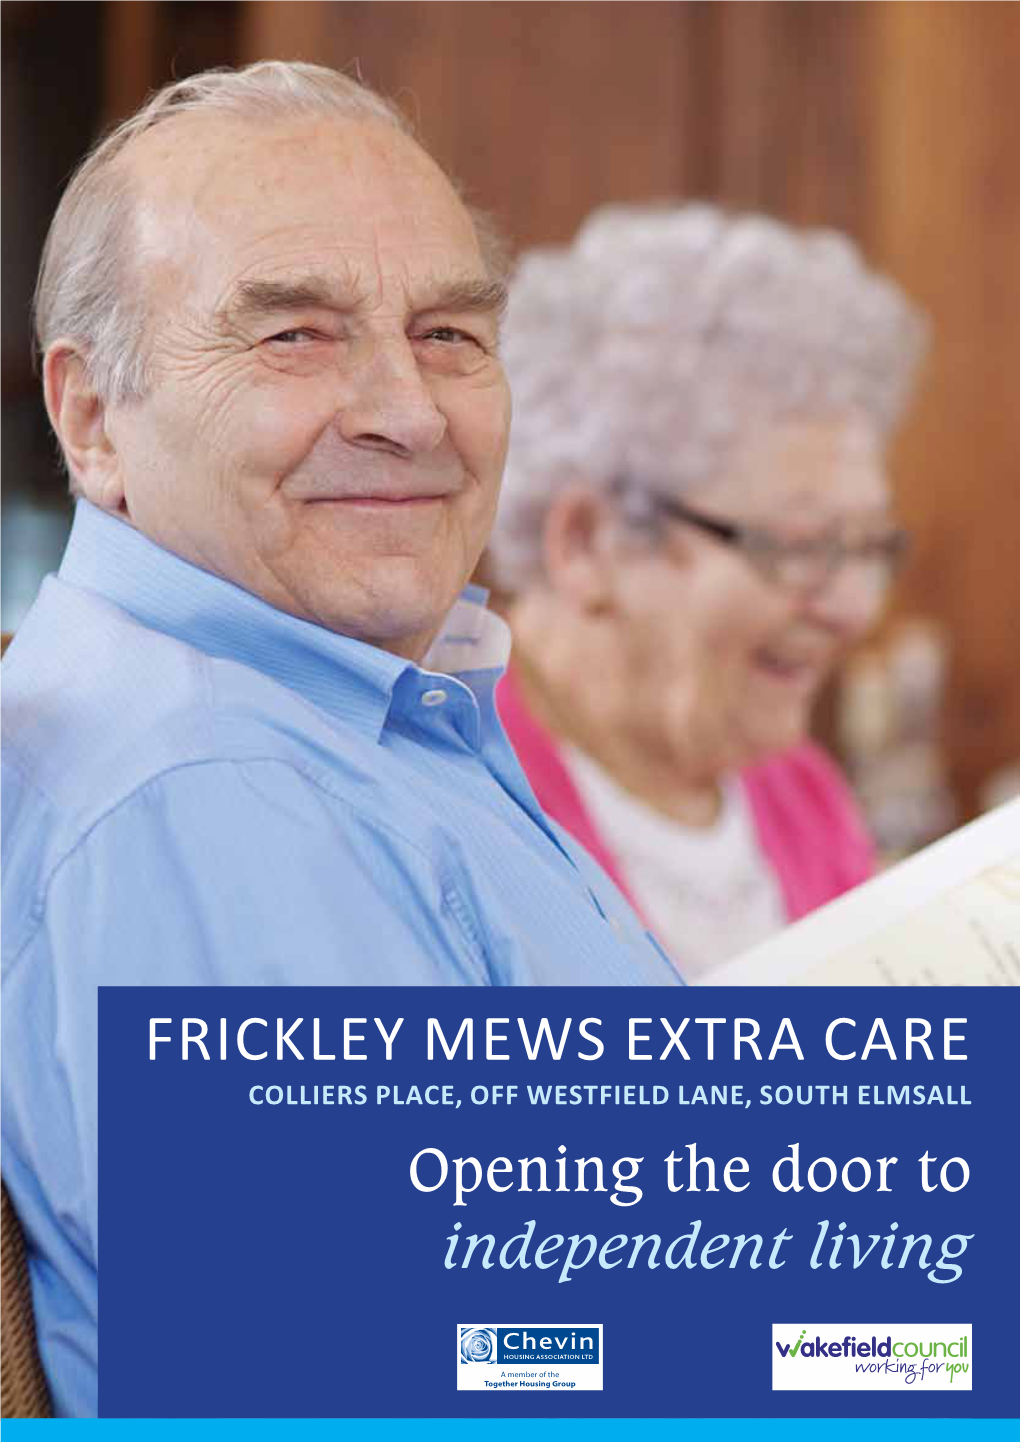 Frickley Mews Extra Care Opening the Door to Independent Living